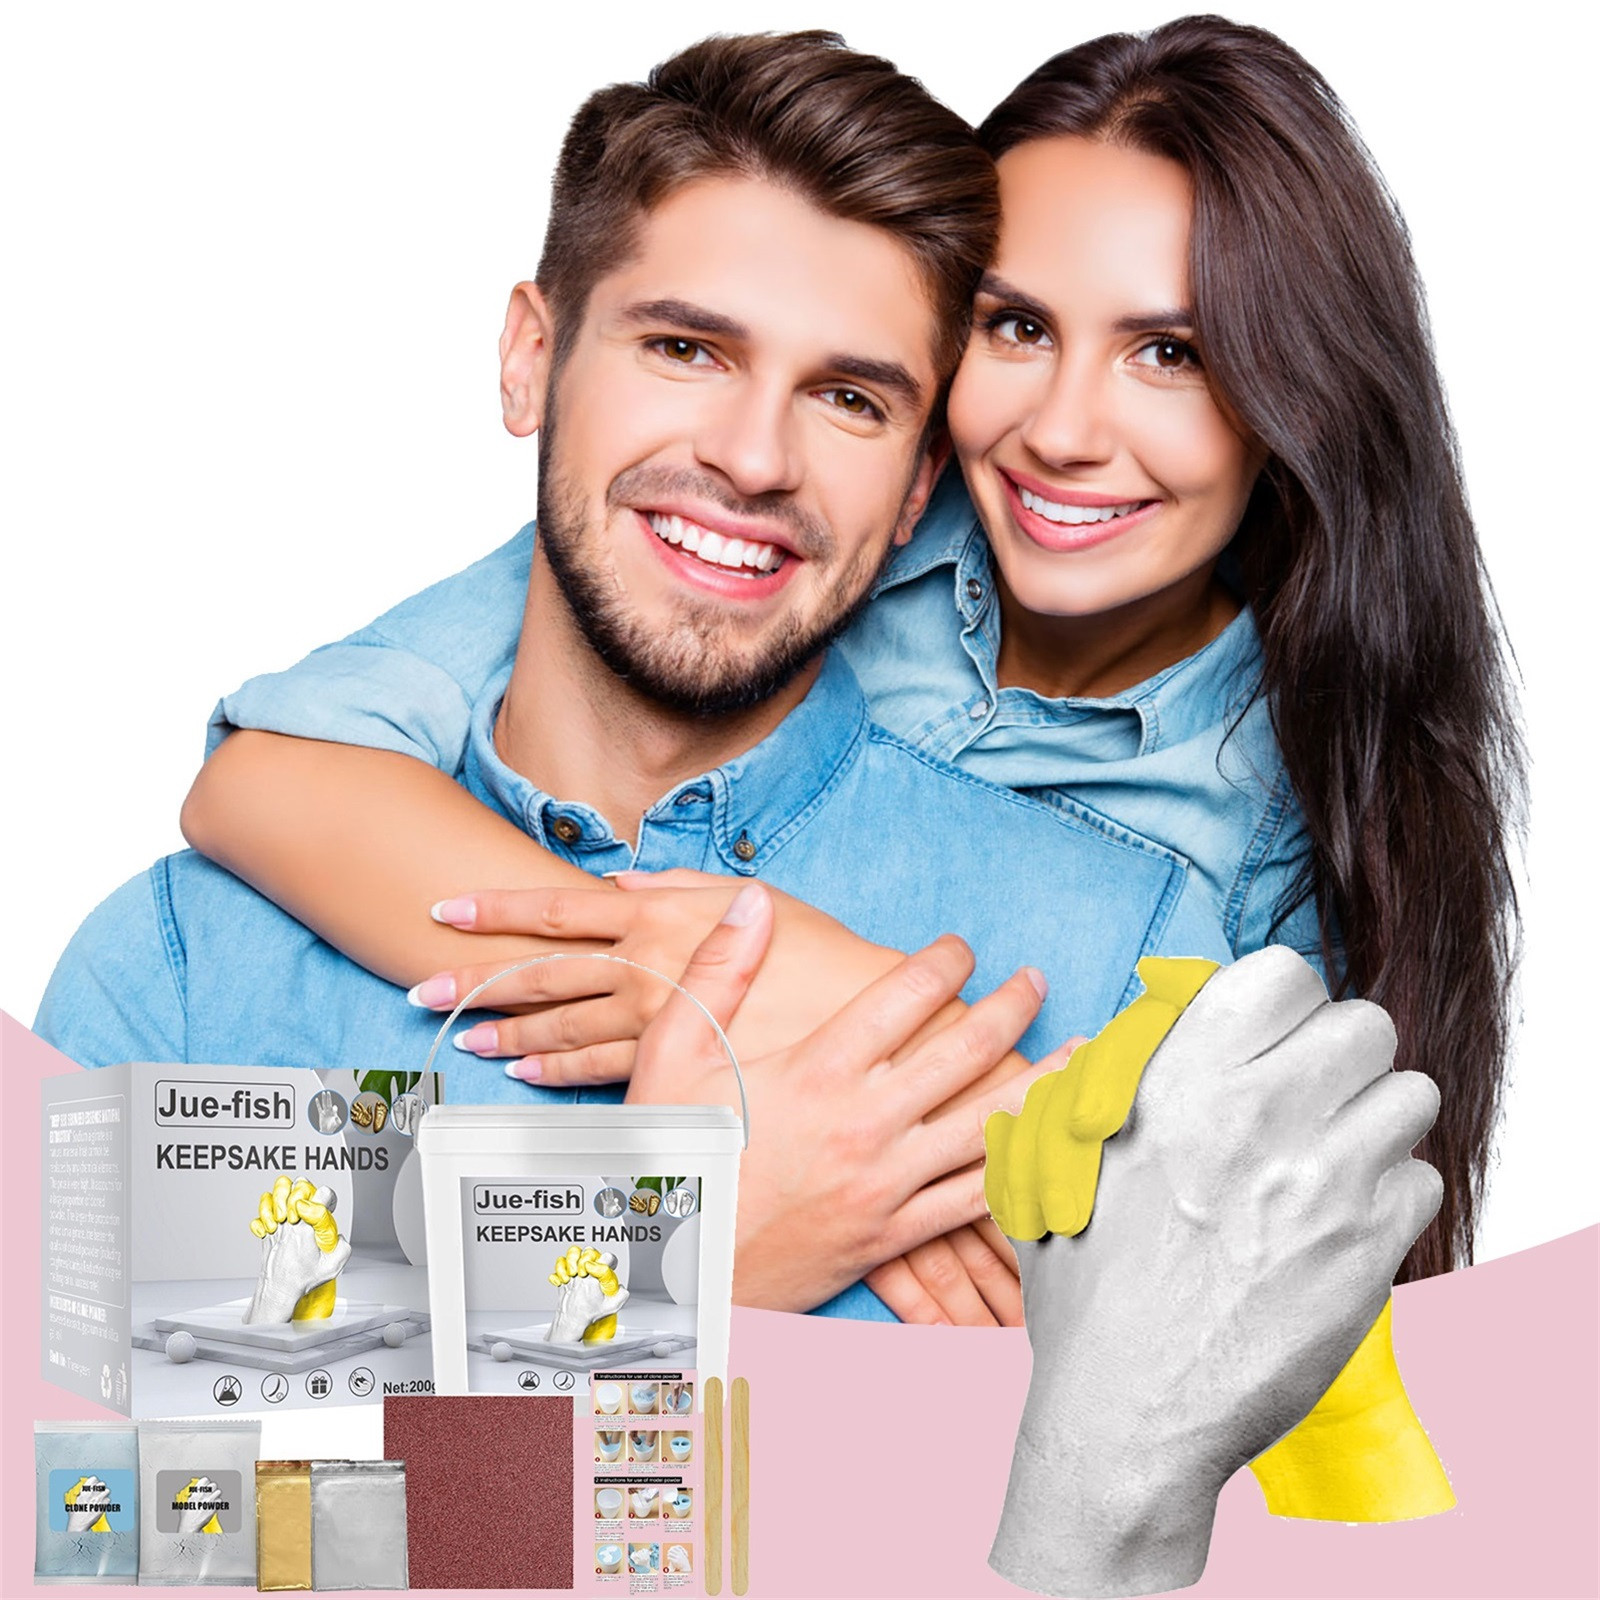 Loyerfyivos Hand Casting Kit Couples - Plaster Hand Mold Casting Kit,  Anniversary Gift for Couple, DIY Gifts for Men, Women, Kids, Unique Wedding  Gifts Ideas, Cool Christmas Gifts Boyfriend Girlfriend 